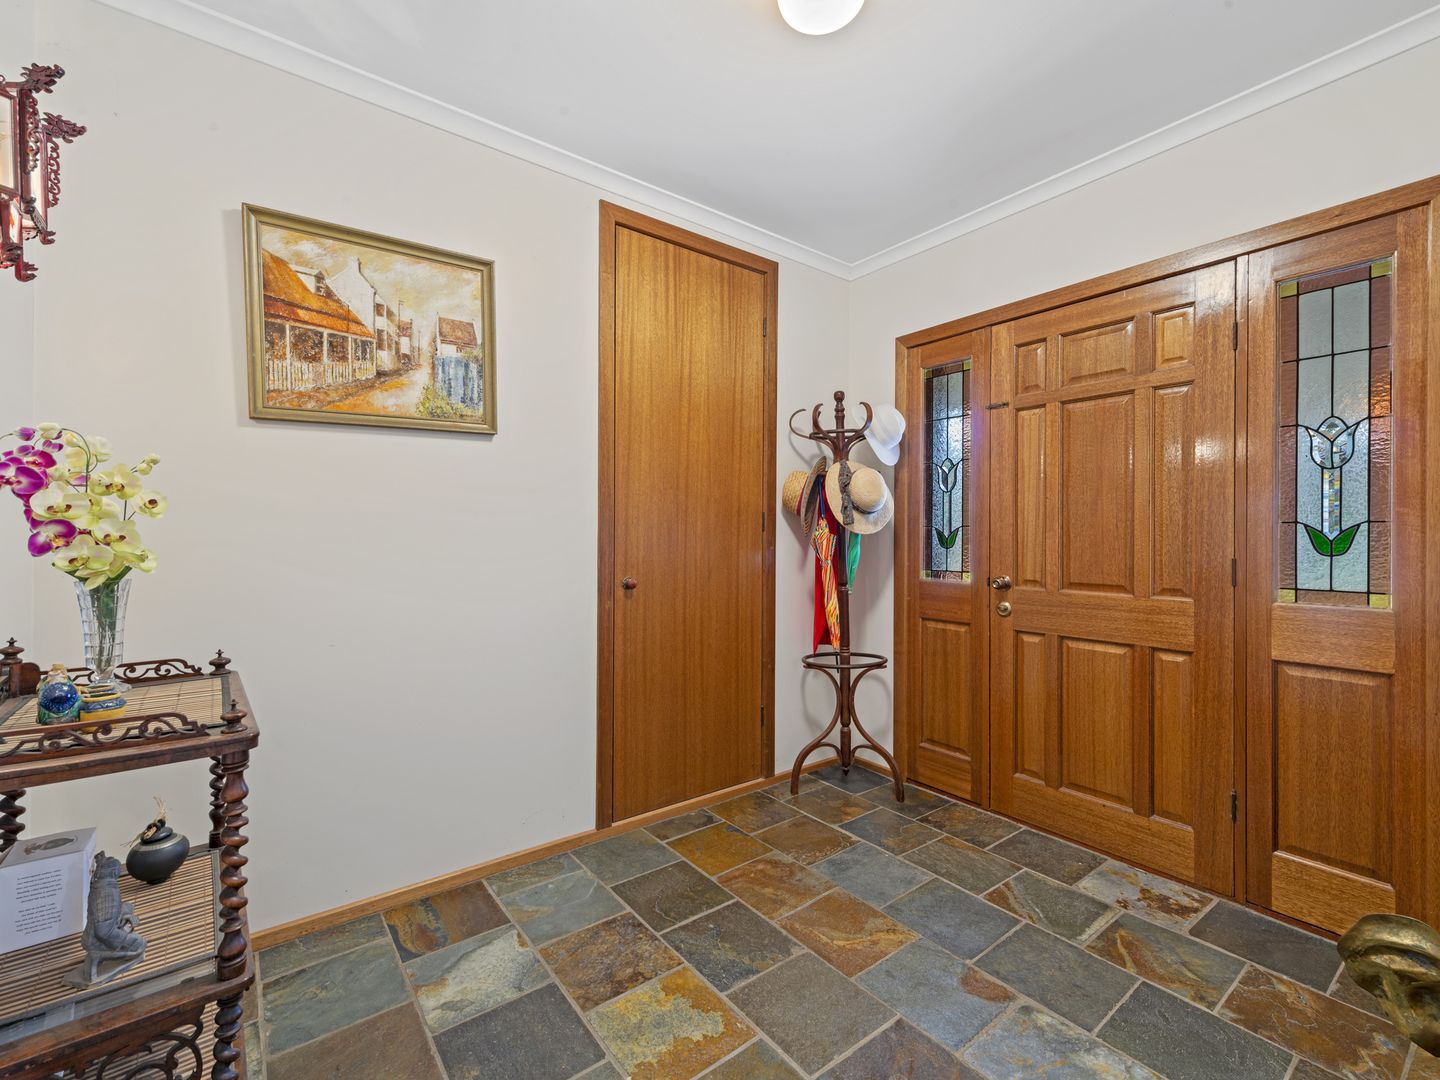 Lot 10 Babs Court, Tocumwal NSW 2714, Image 1